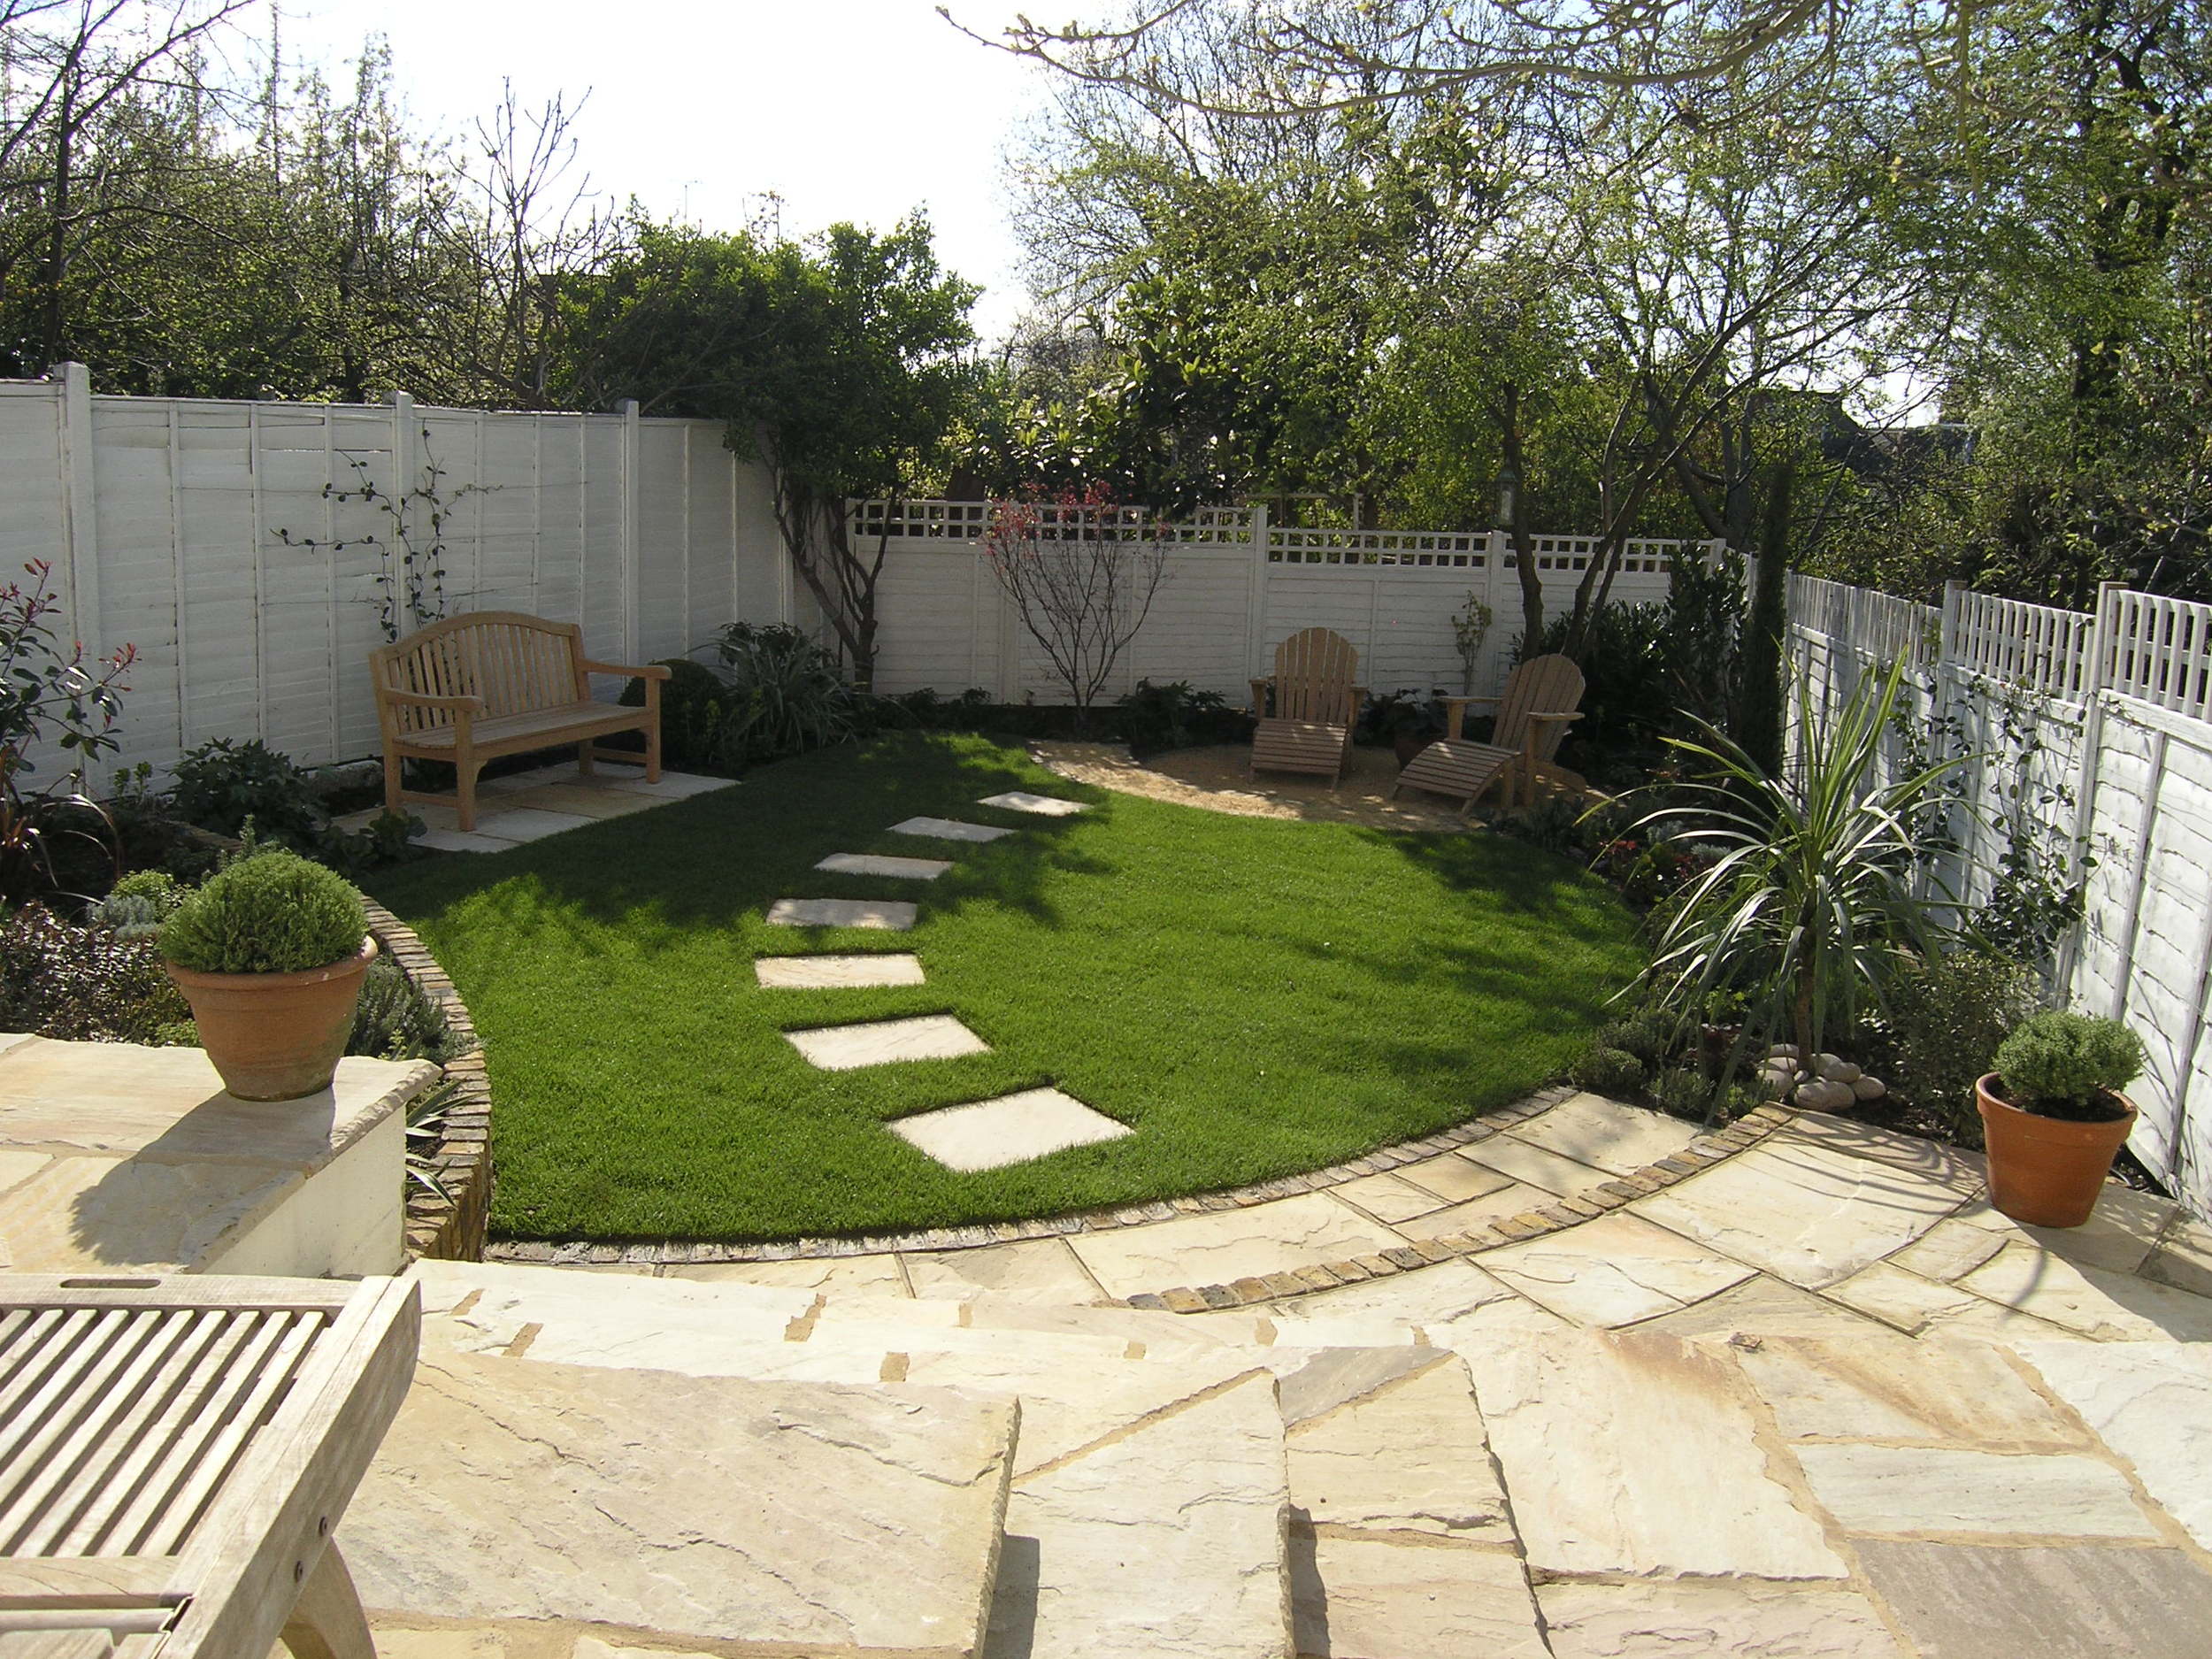 Radial borders and curved sandstone in North London garden design